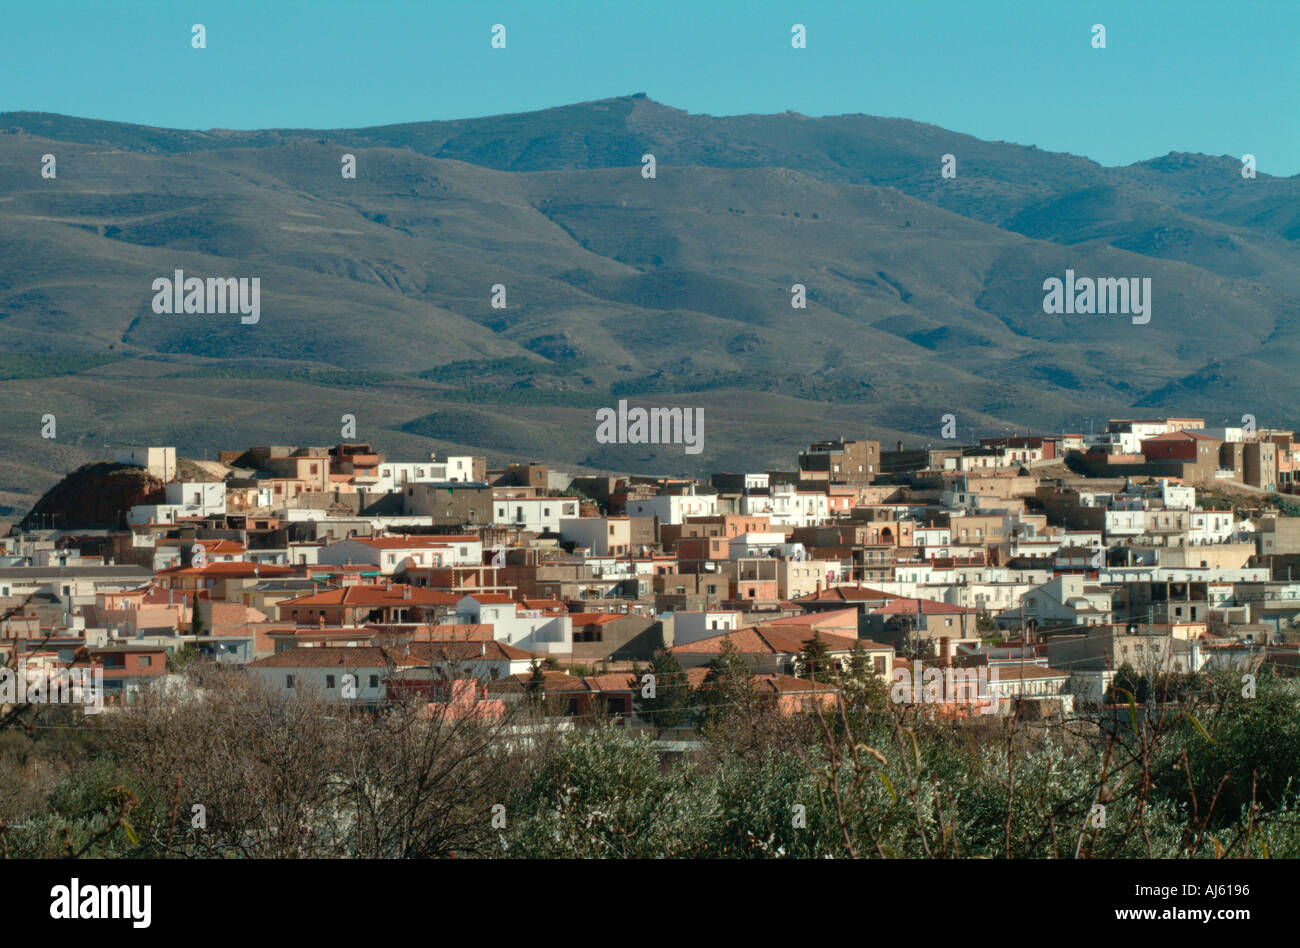 Spanish town in the foothills of the Sierra Nevada mountains andalucia spain Stock Photo